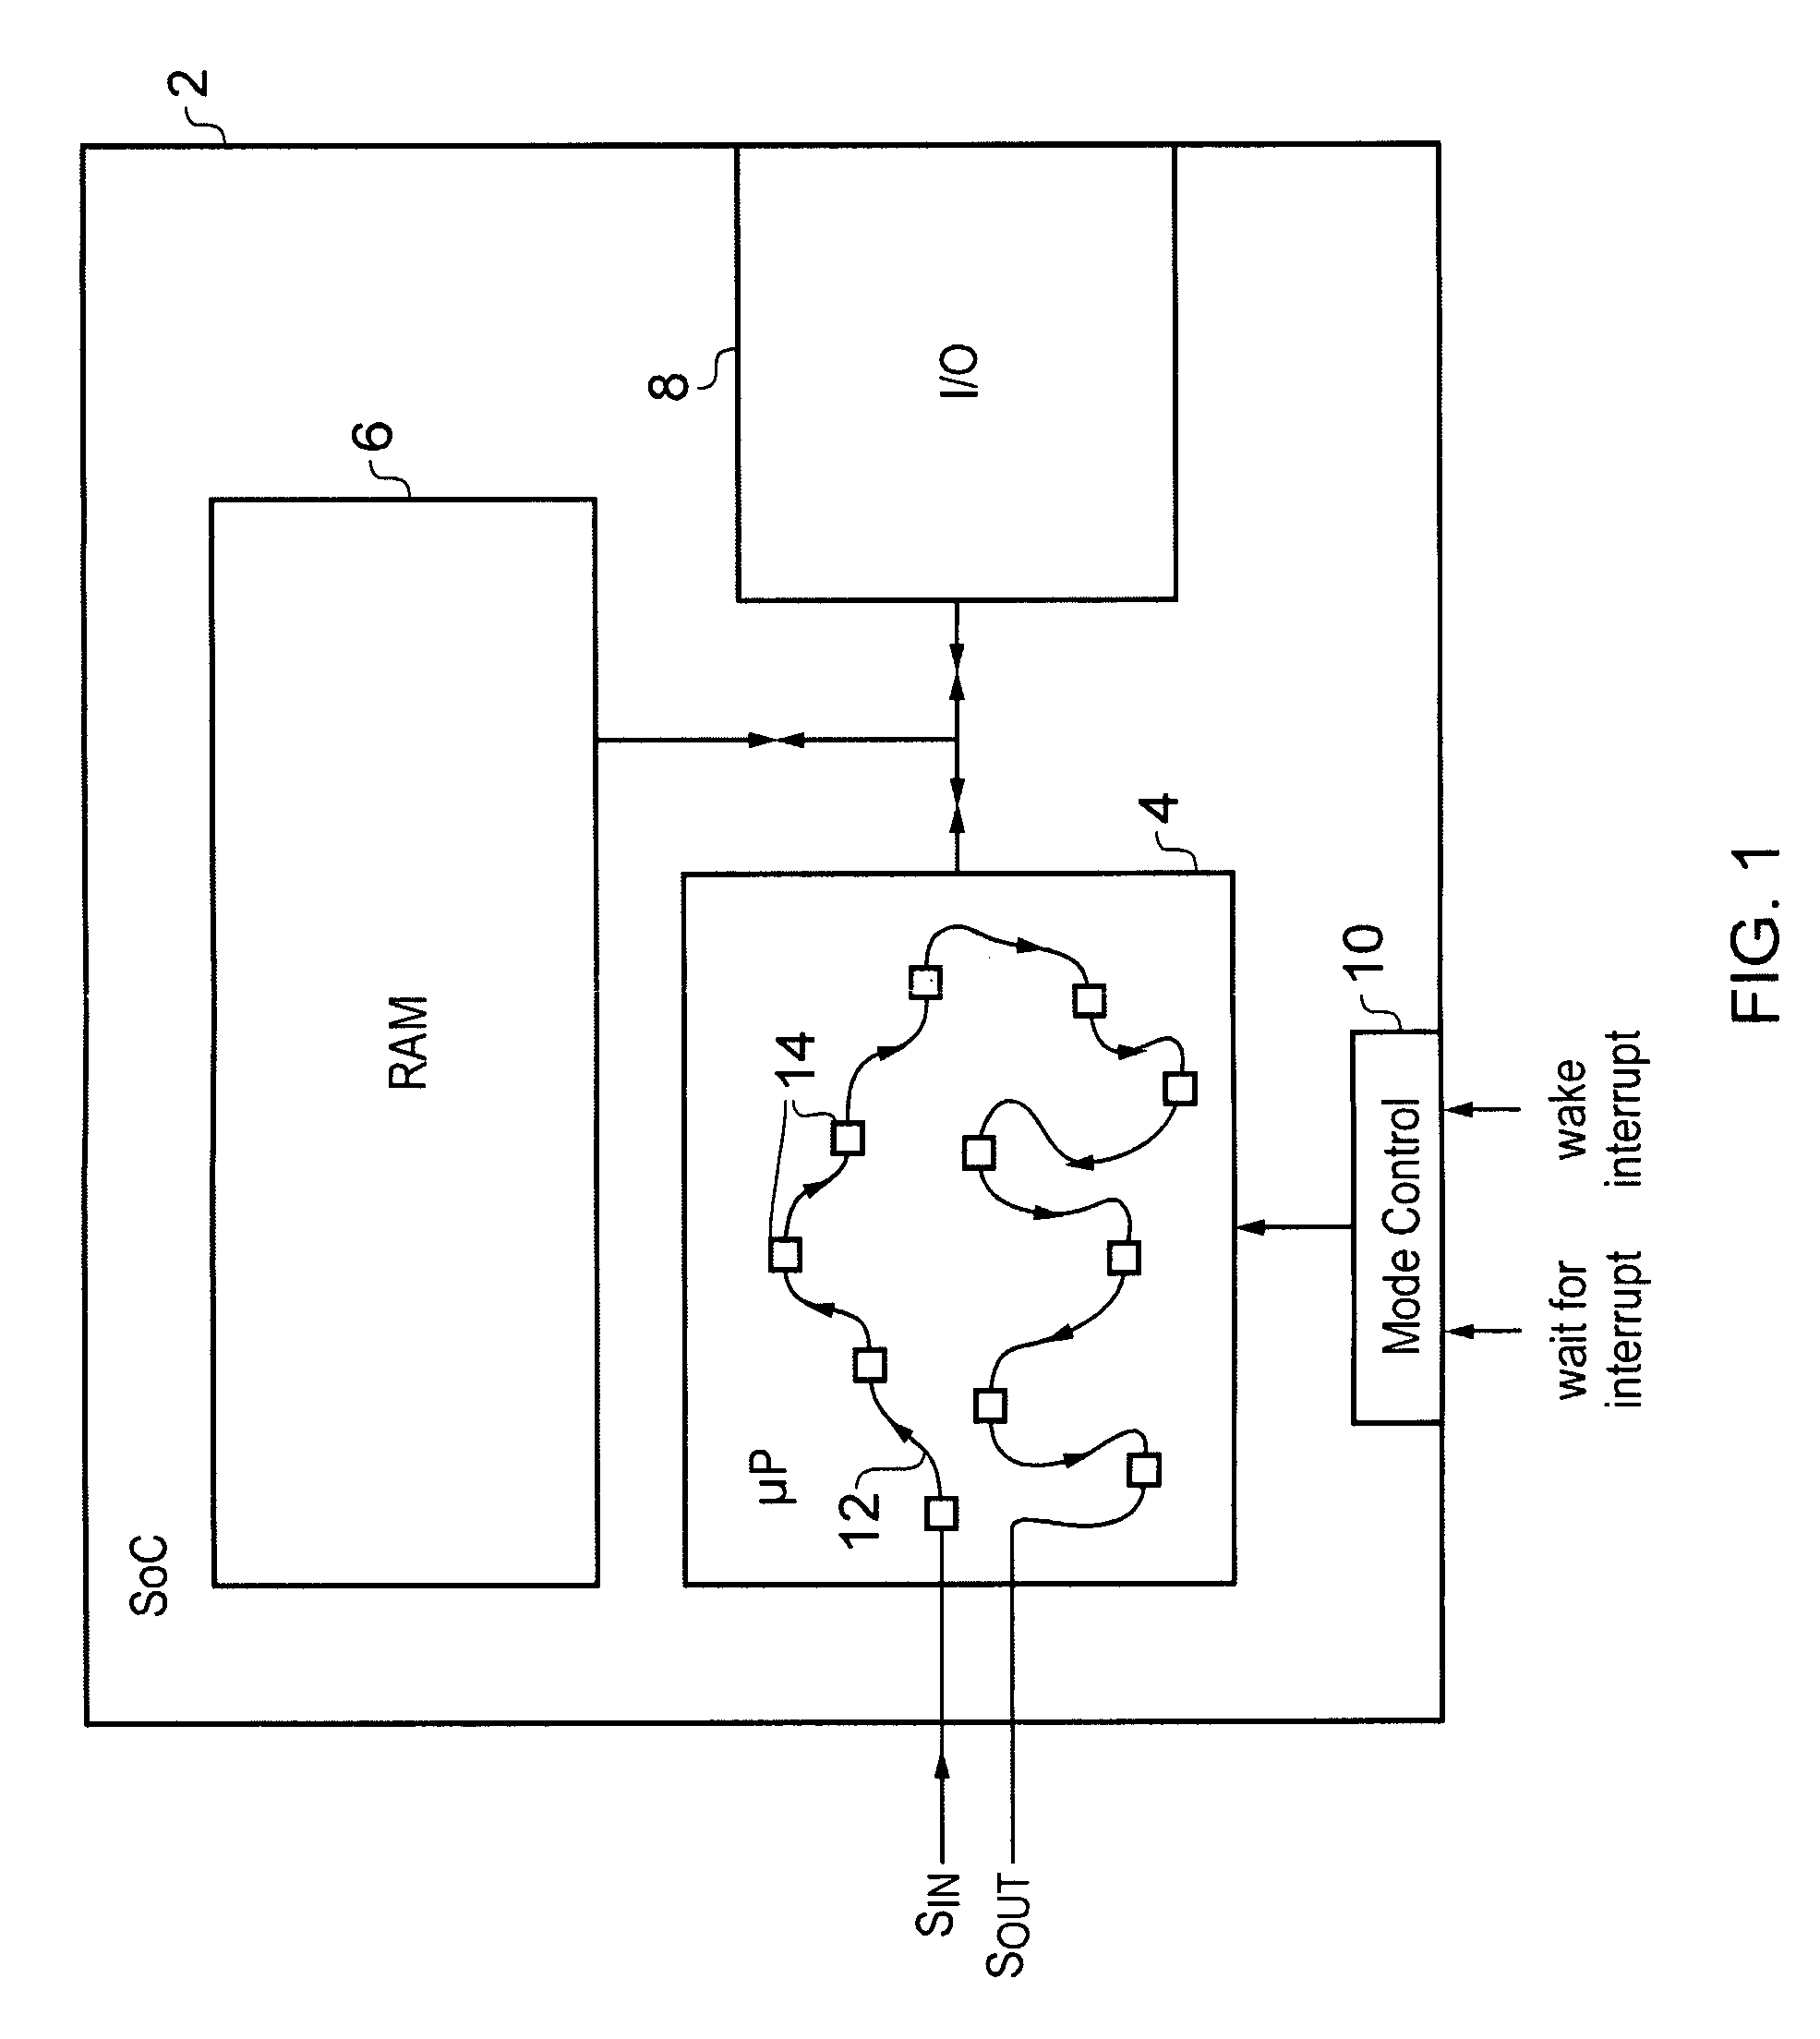 State Retention using a variable retention voltage